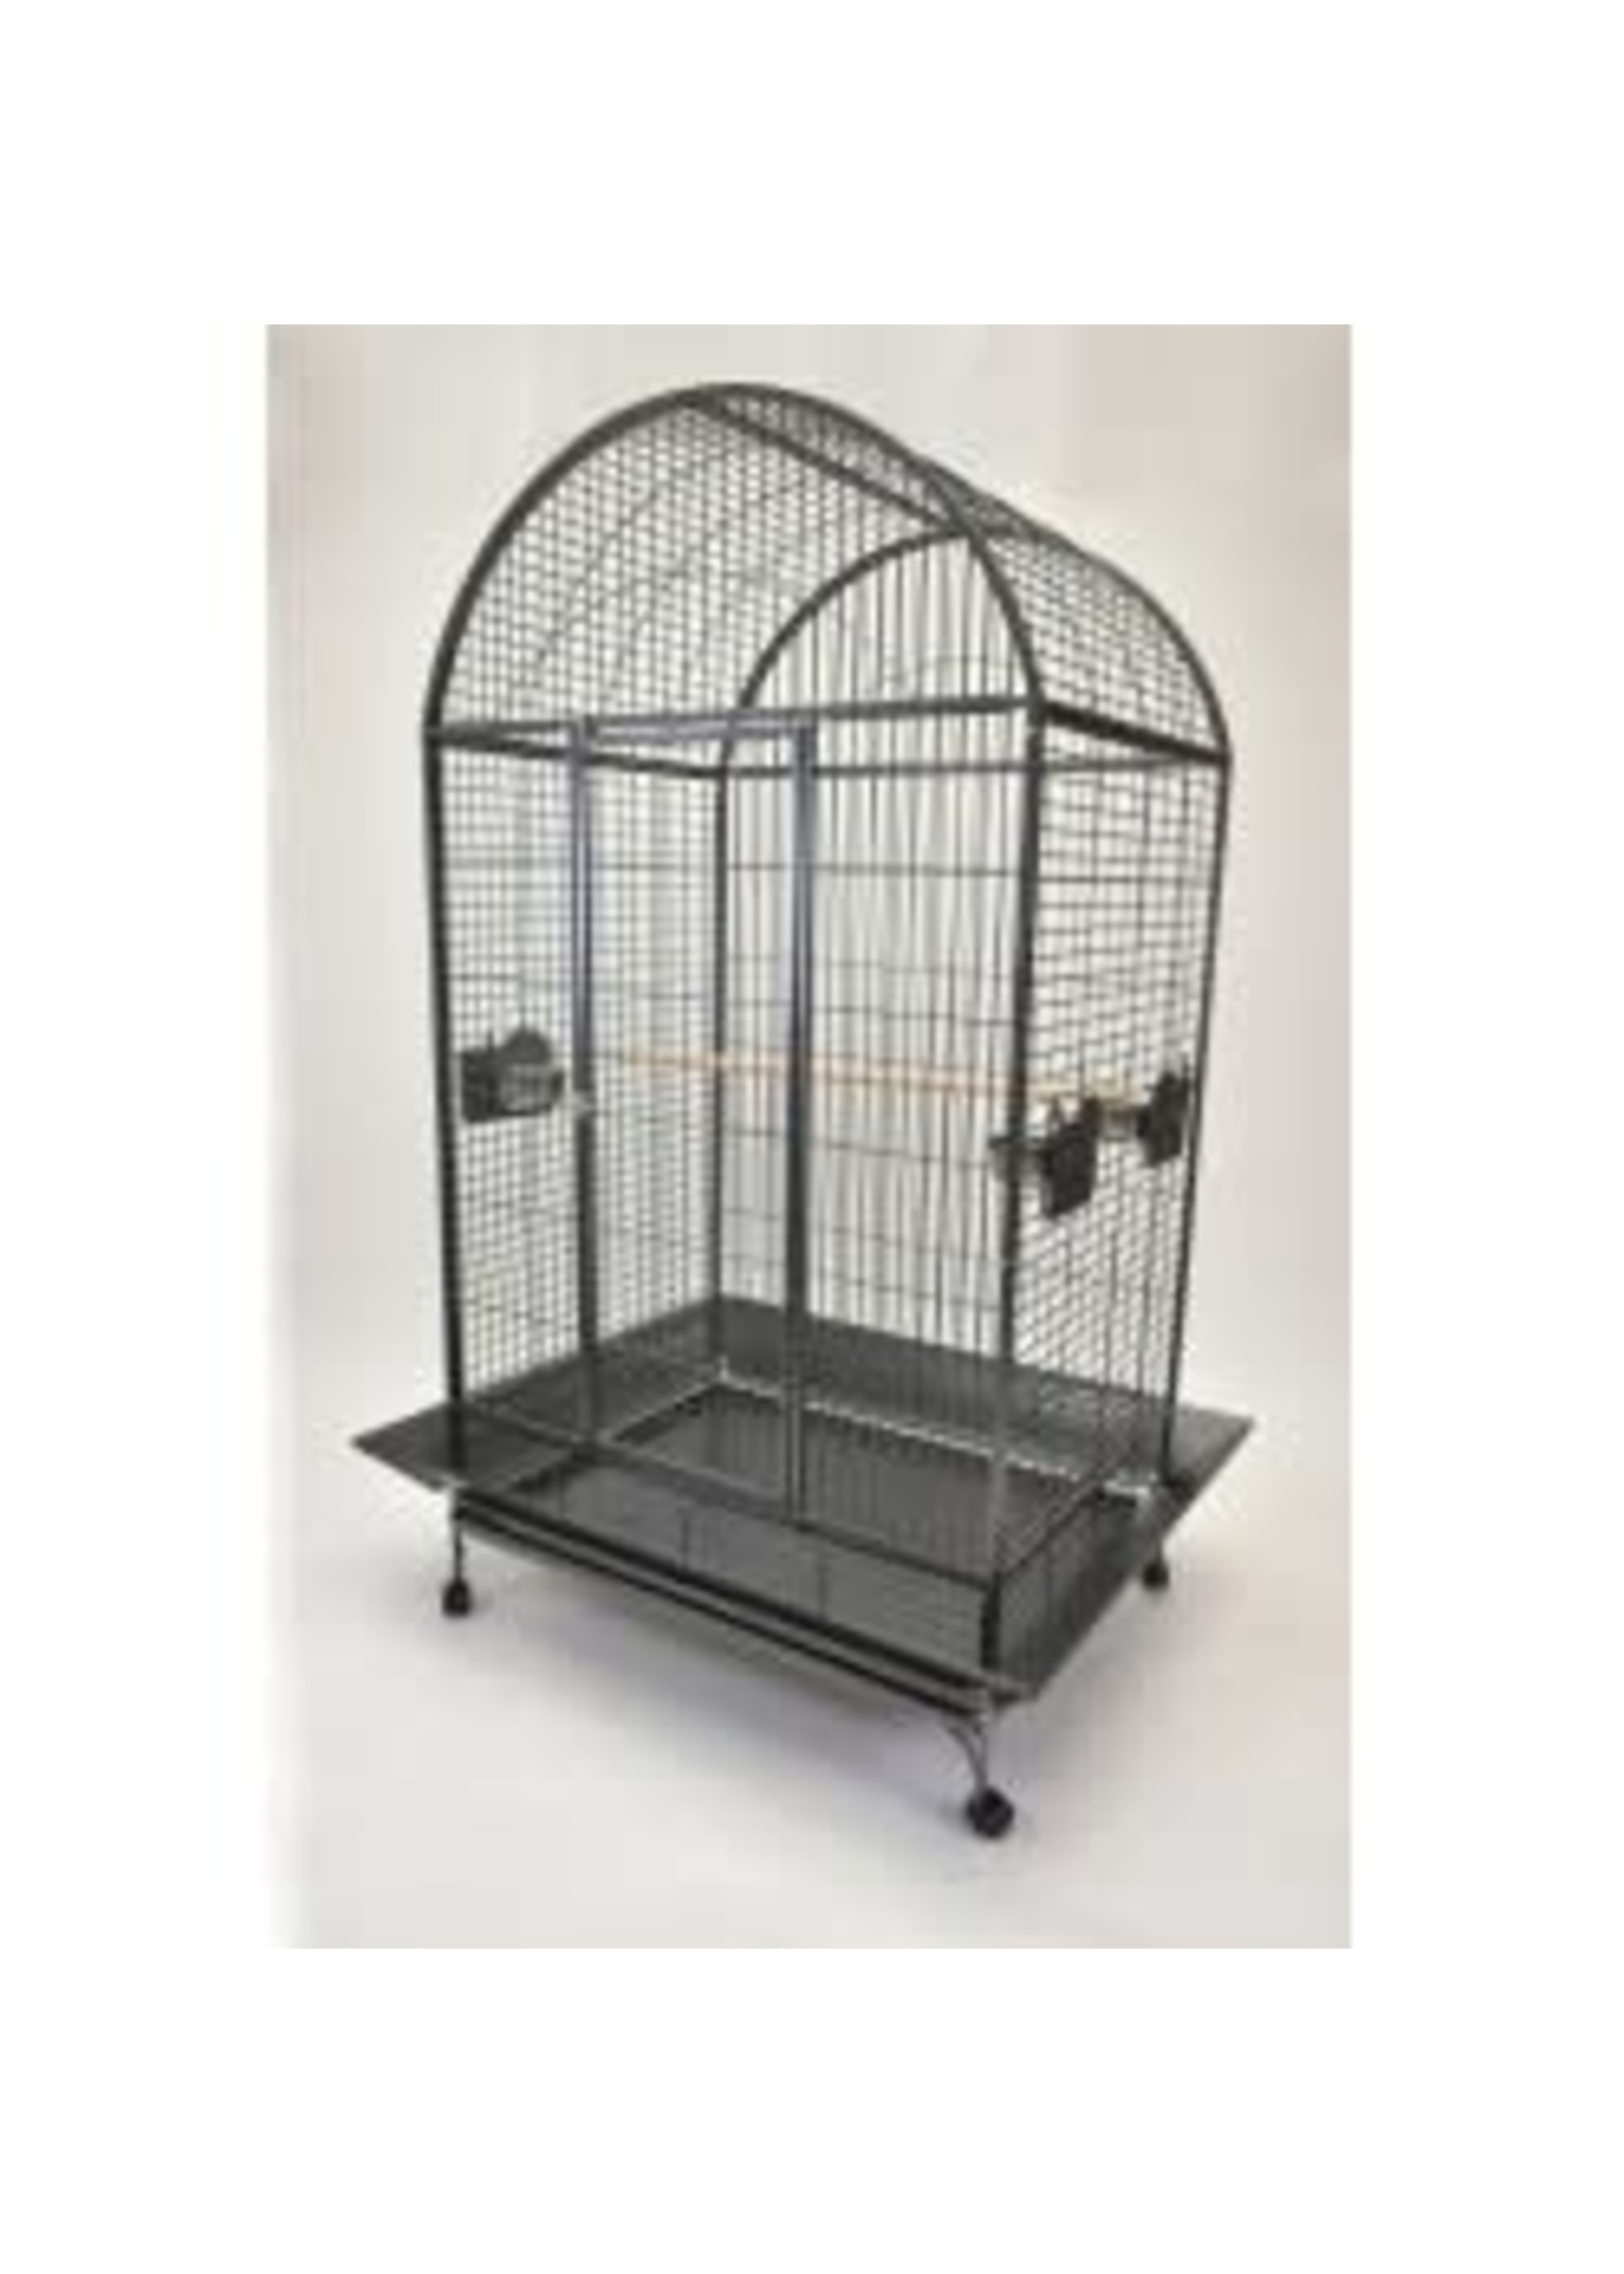 Glitter Pets GP LARGE DOME TOP PARROT CAGE WHITE  40'' DMT01